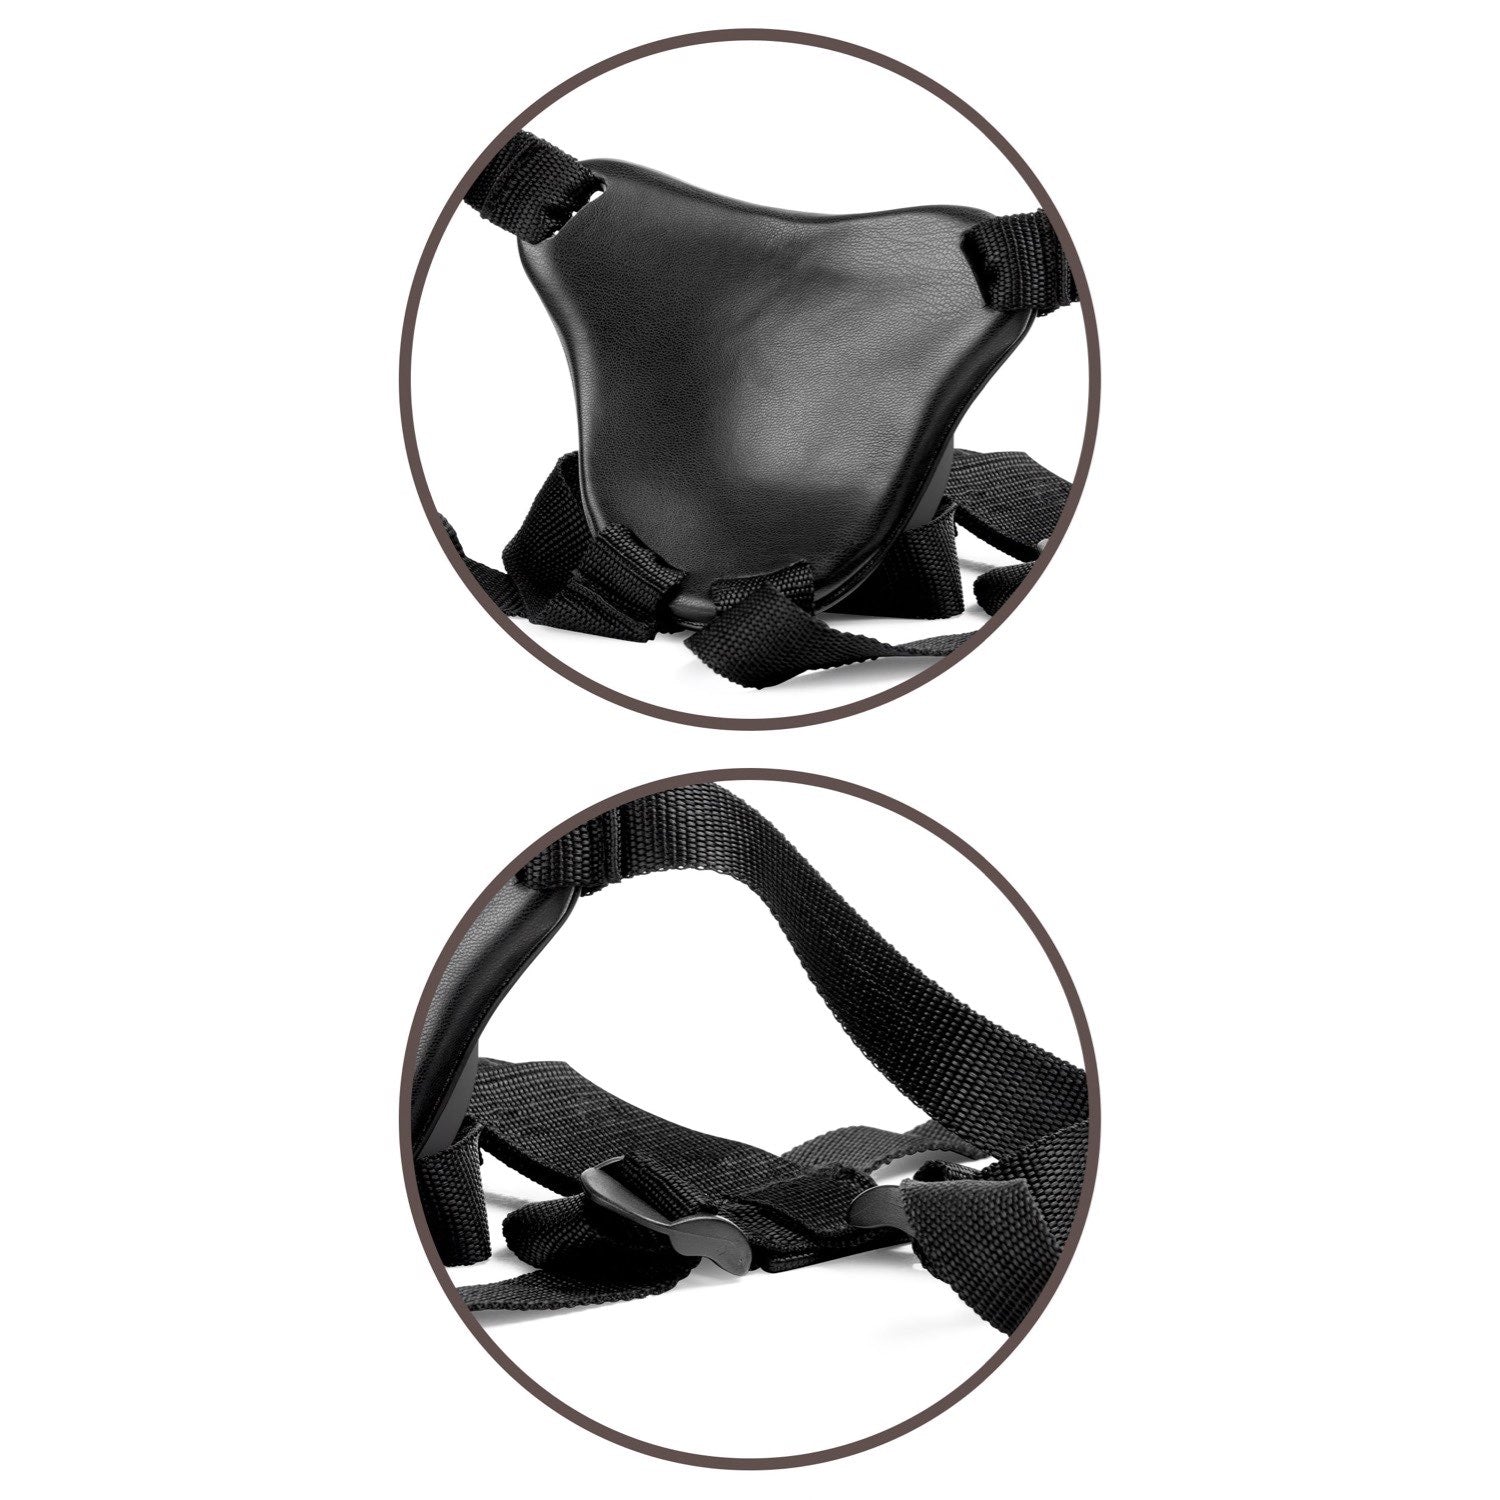 King Cock Elite Comfy Body Dock Strap-On Harness - Black Adjustable Strap-On Harness (No Probe Included) by Pipedream